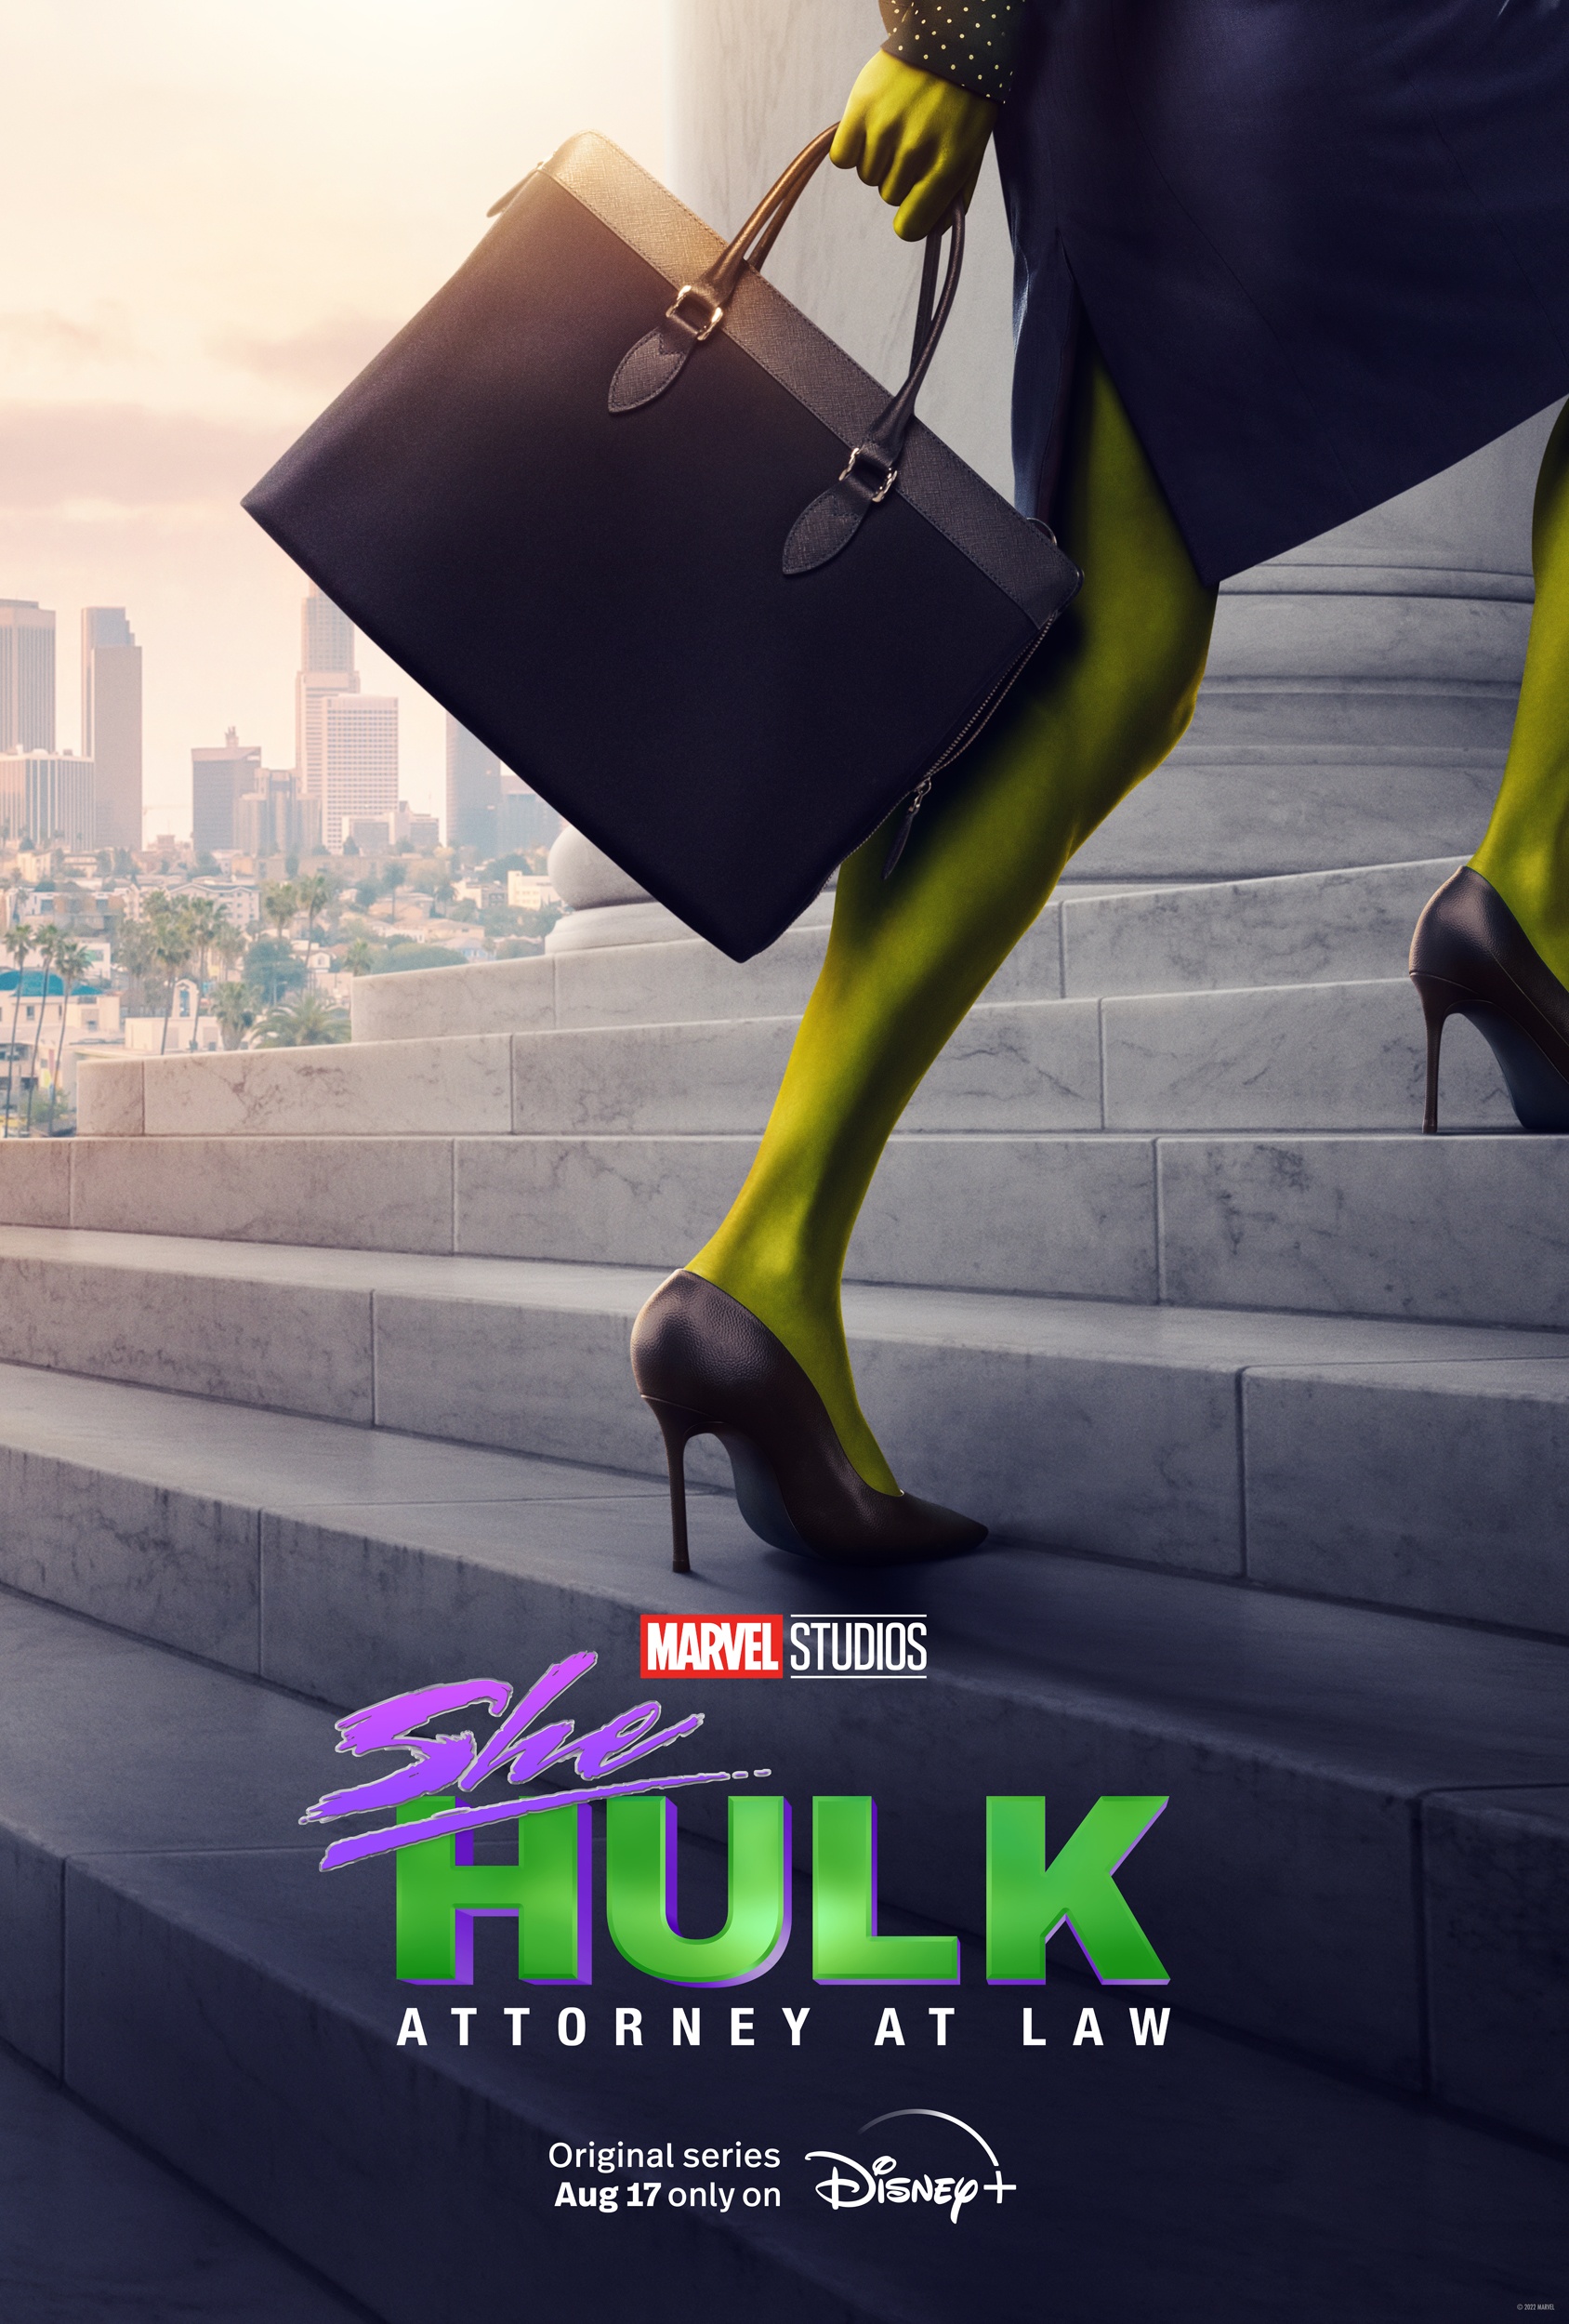 New Series: ‘She-Hulk Attorney At Law’